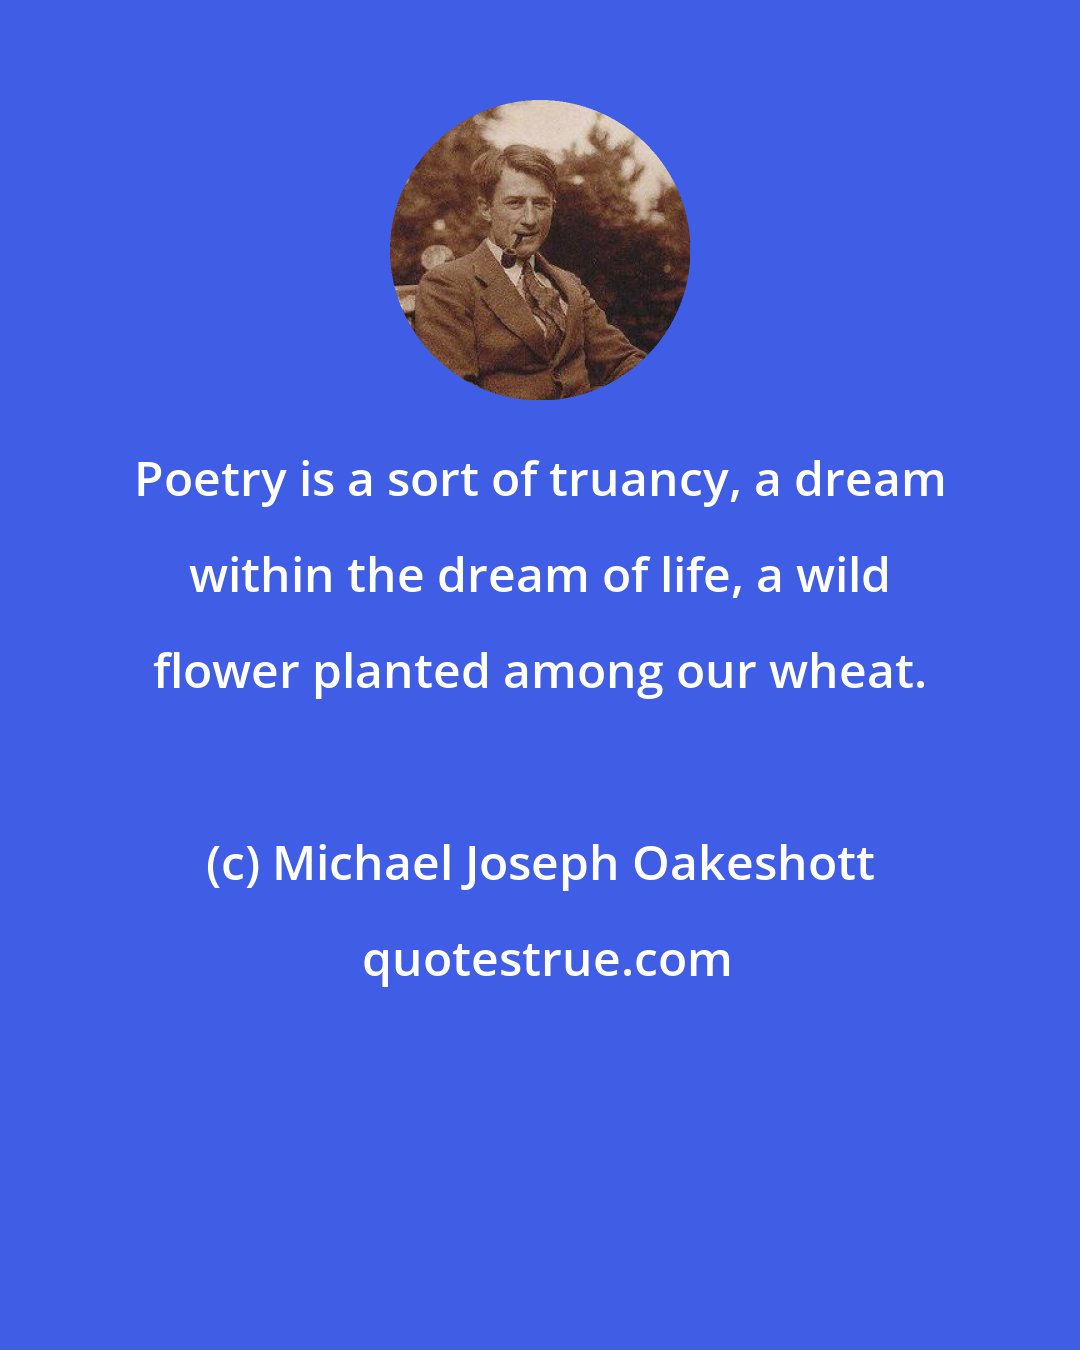 Michael Joseph Oakeshott: Poetry is a sort of truancy, a dream within the dream of life, a wild flower planted among our wheat.